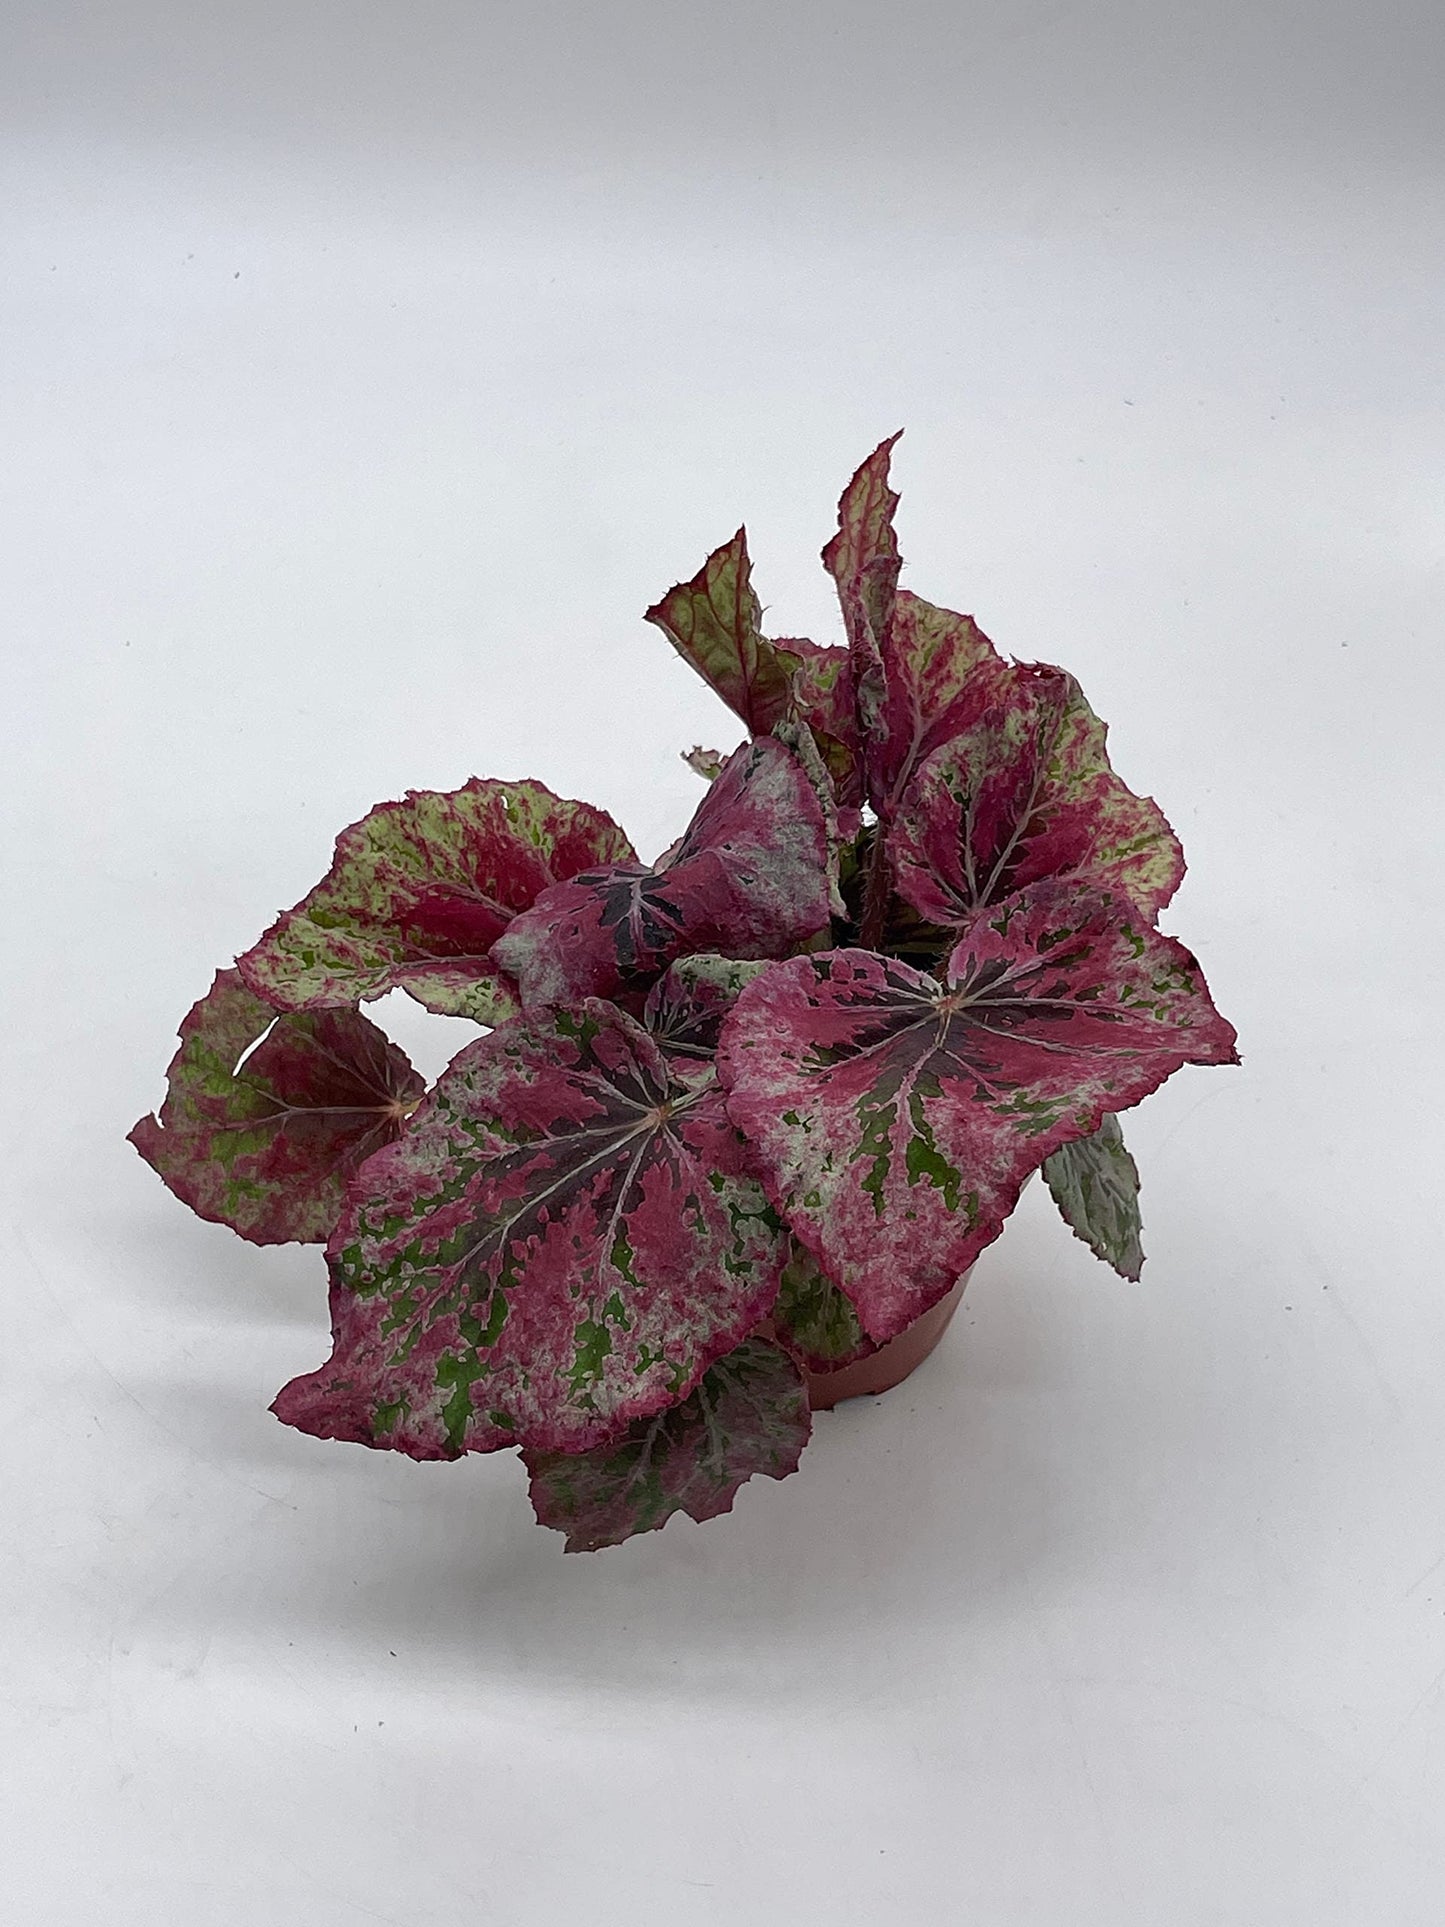 BubbleBlooms 'Harmony's Venetian Red', Begonia Rex, 4 inch, Painted-Leaf Begonia, Unique Homegrown Exclusive